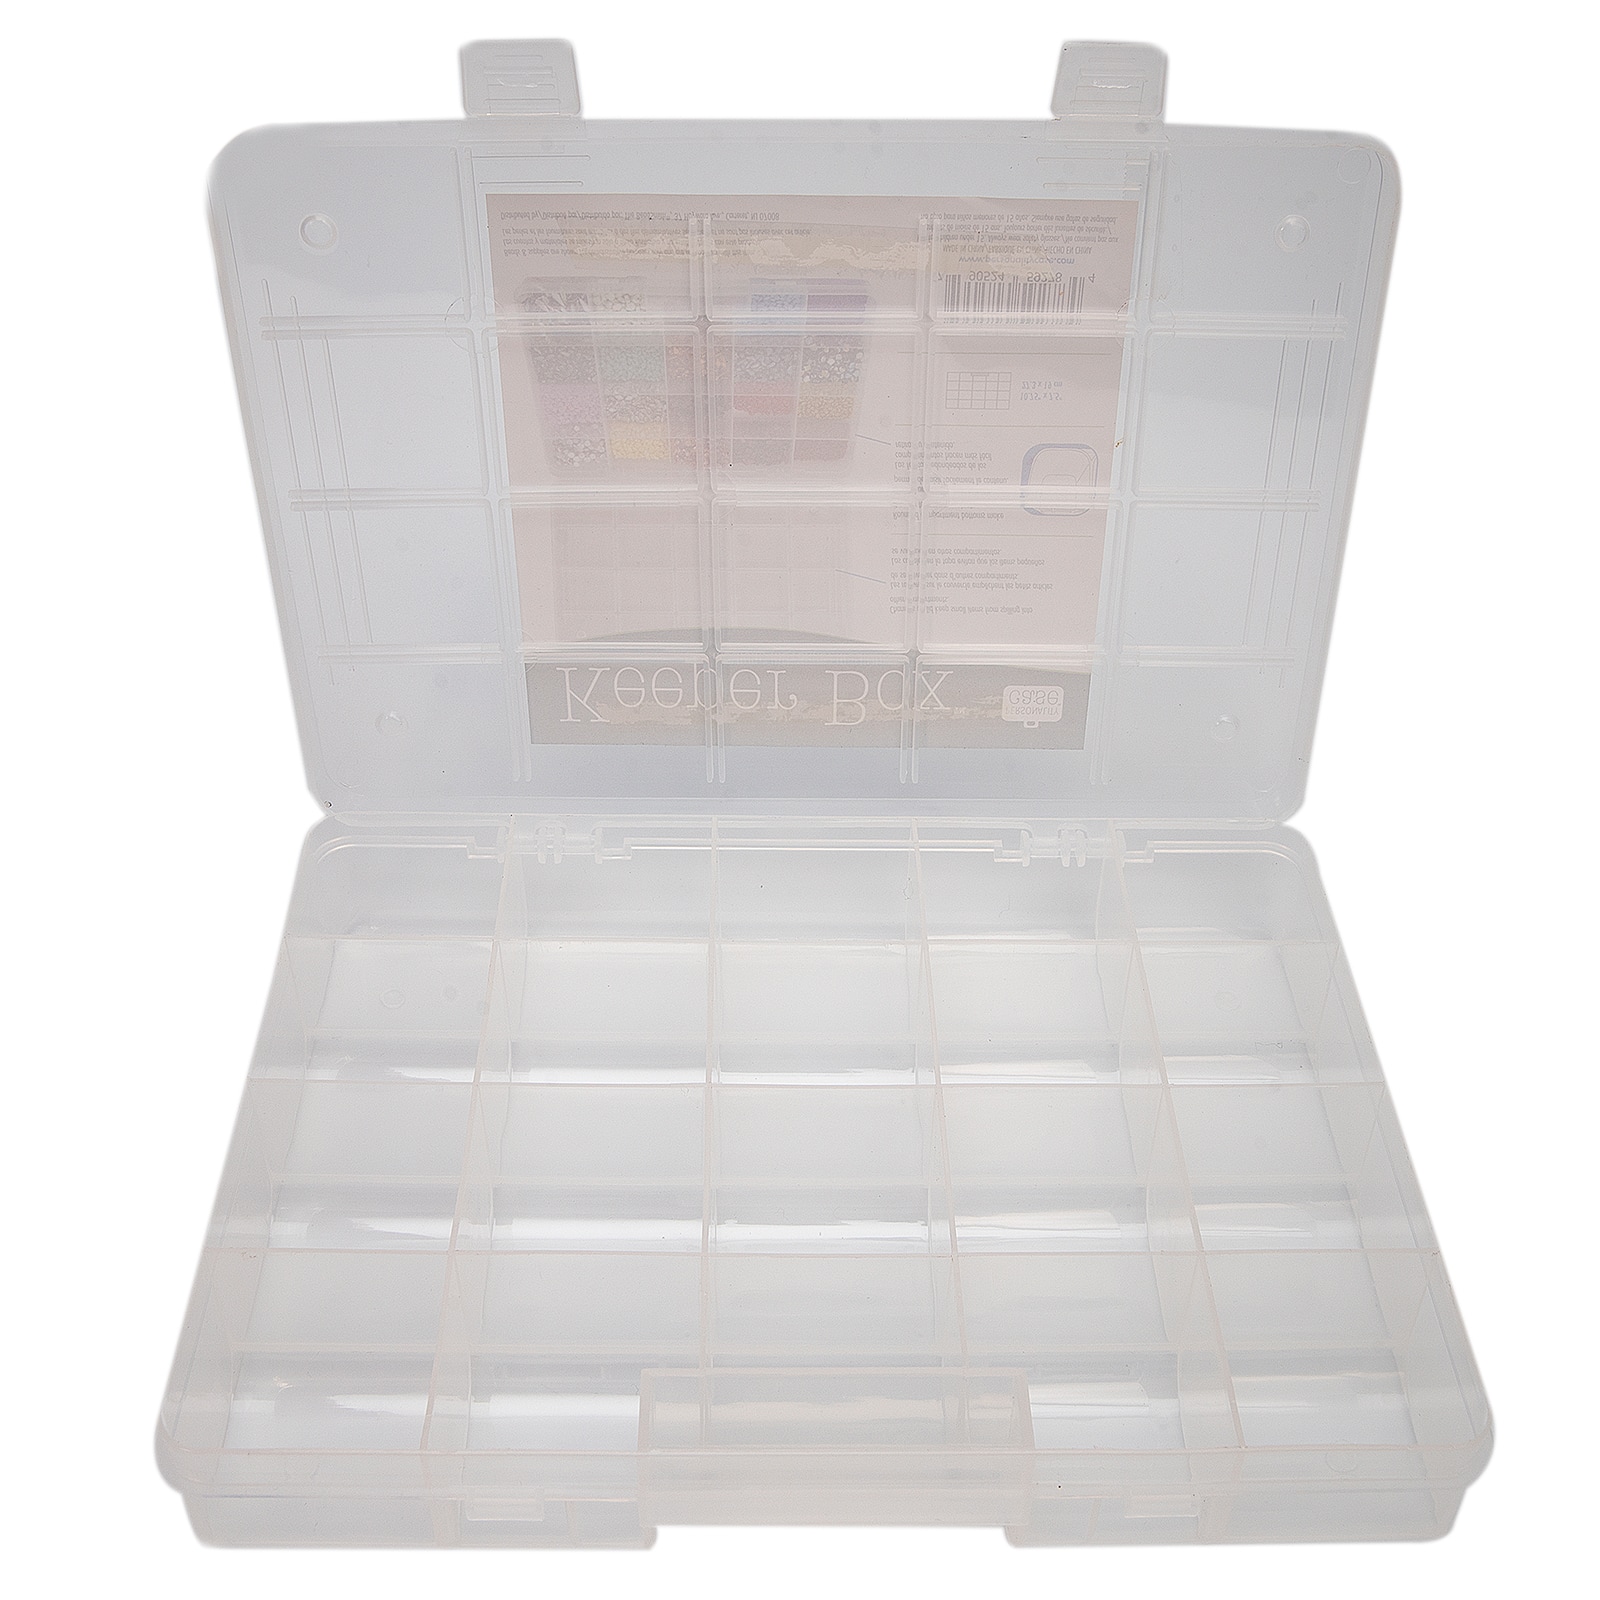  Juvale 3 Pack Bead Storage Organizer Box with 36 Grids and  Removable Dividers - Plastic Container Tray for Craft, Jewelry and Earrings  : Arts, Crafts & Sewing